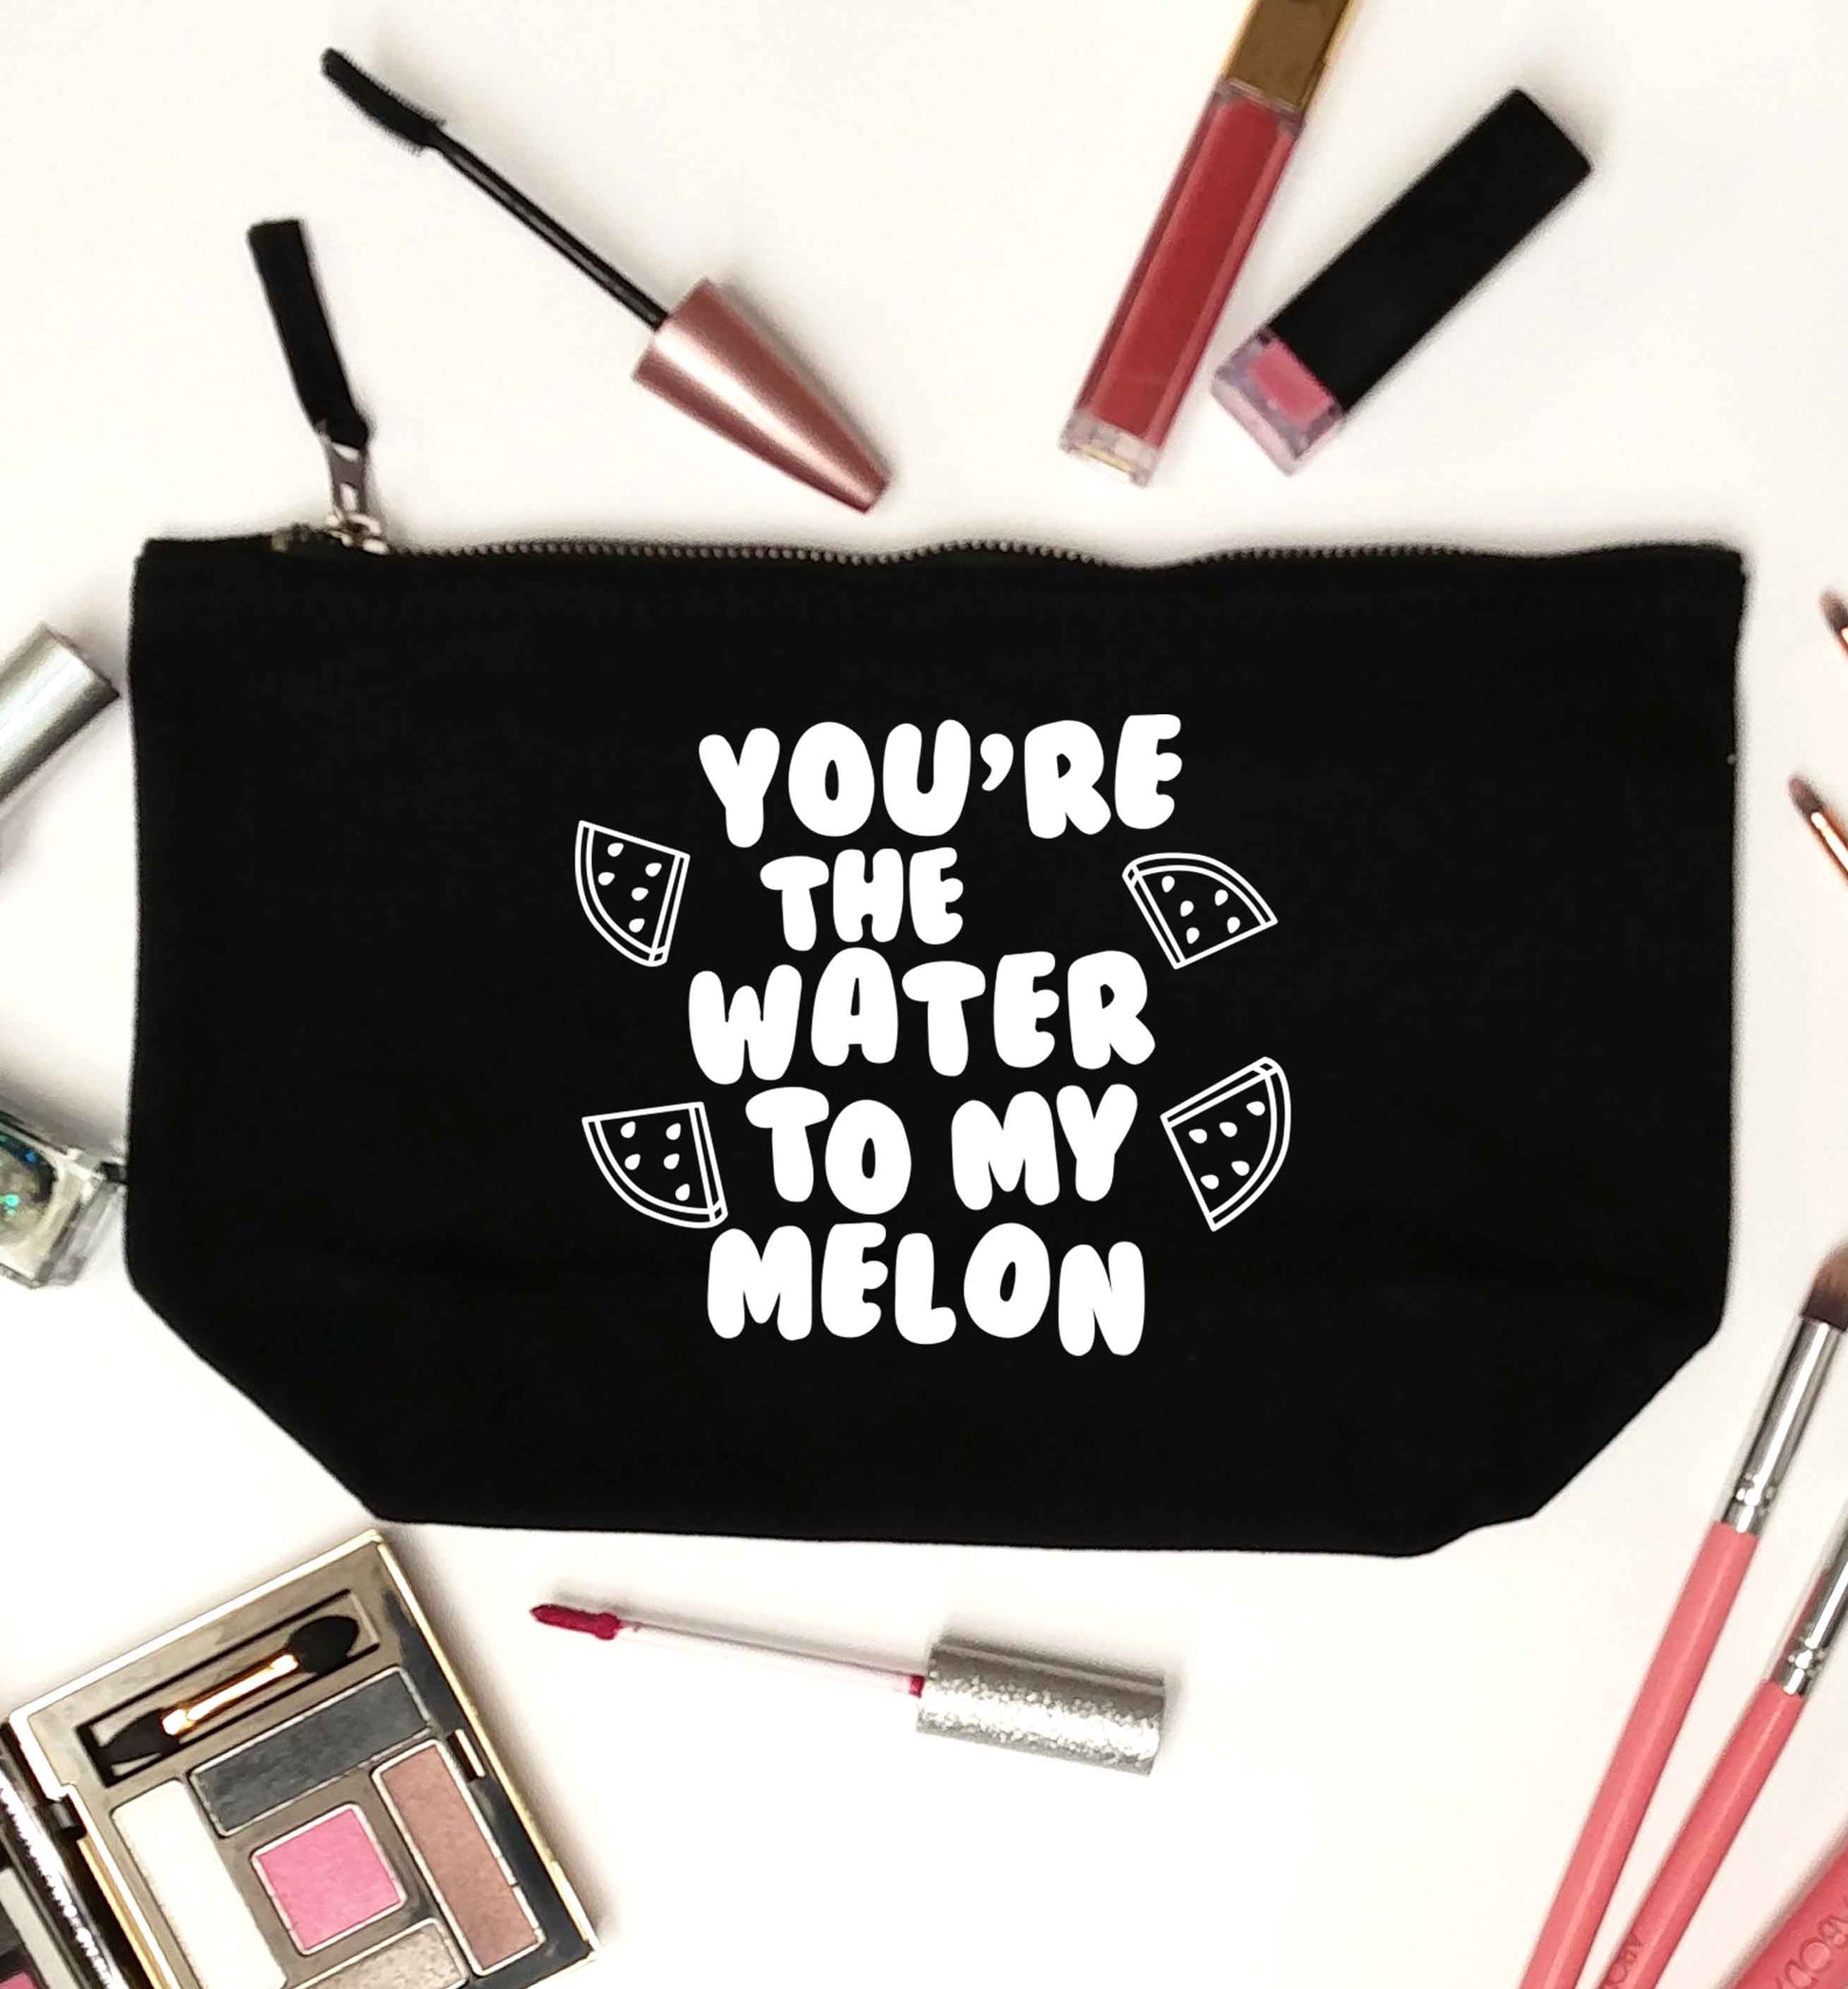 You're the water to my melon black makeup bag